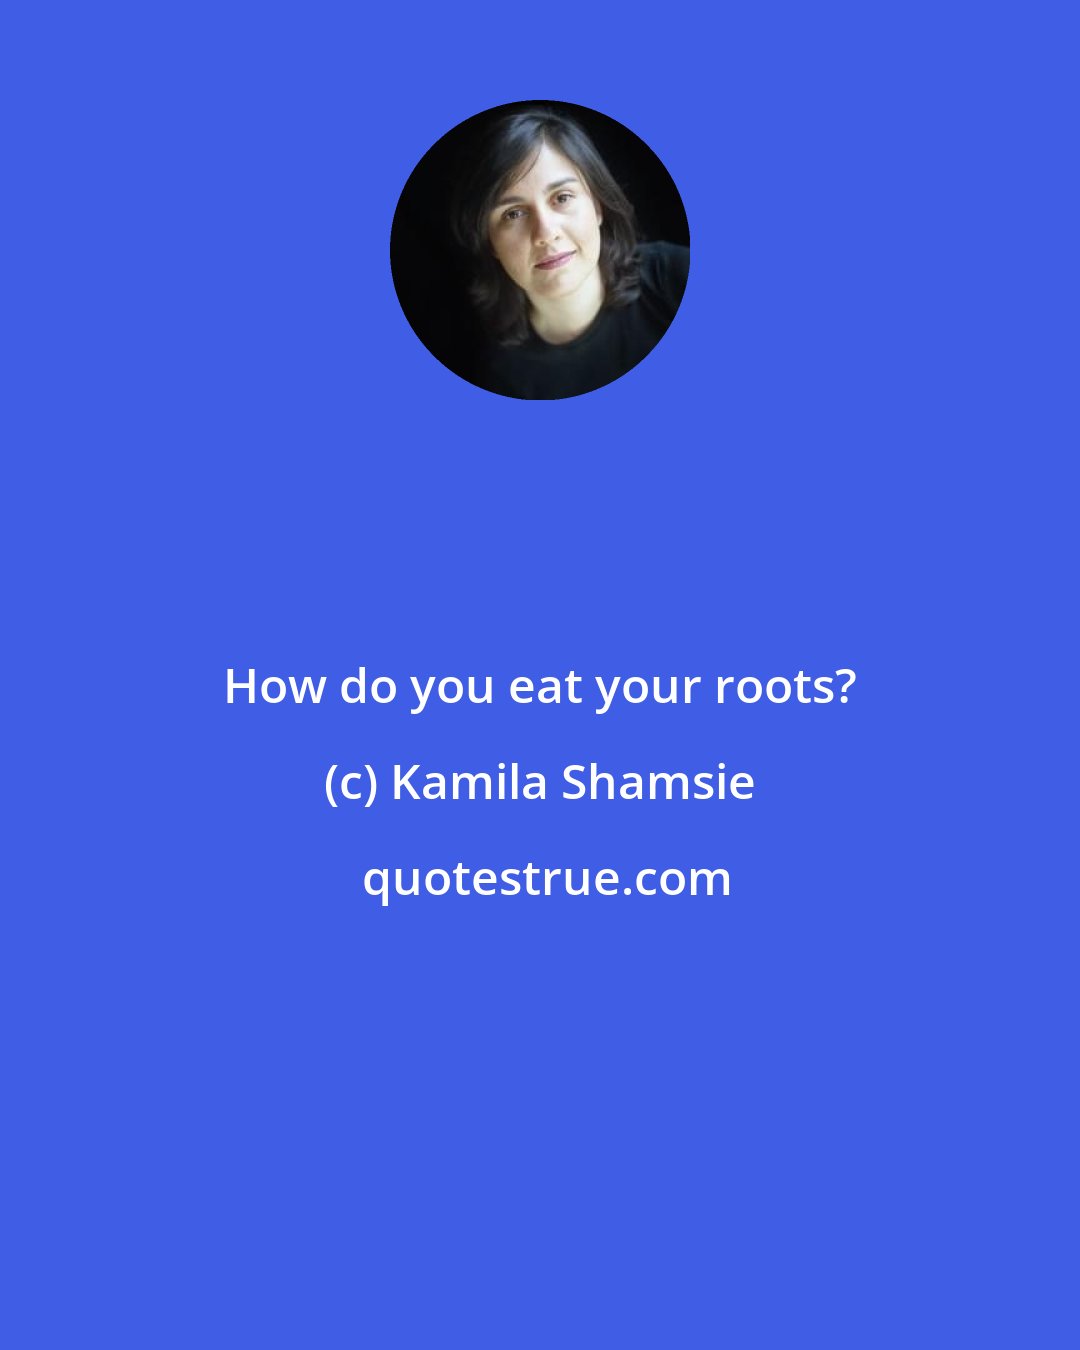 Kamila Shamsie: How do you eat your roots?